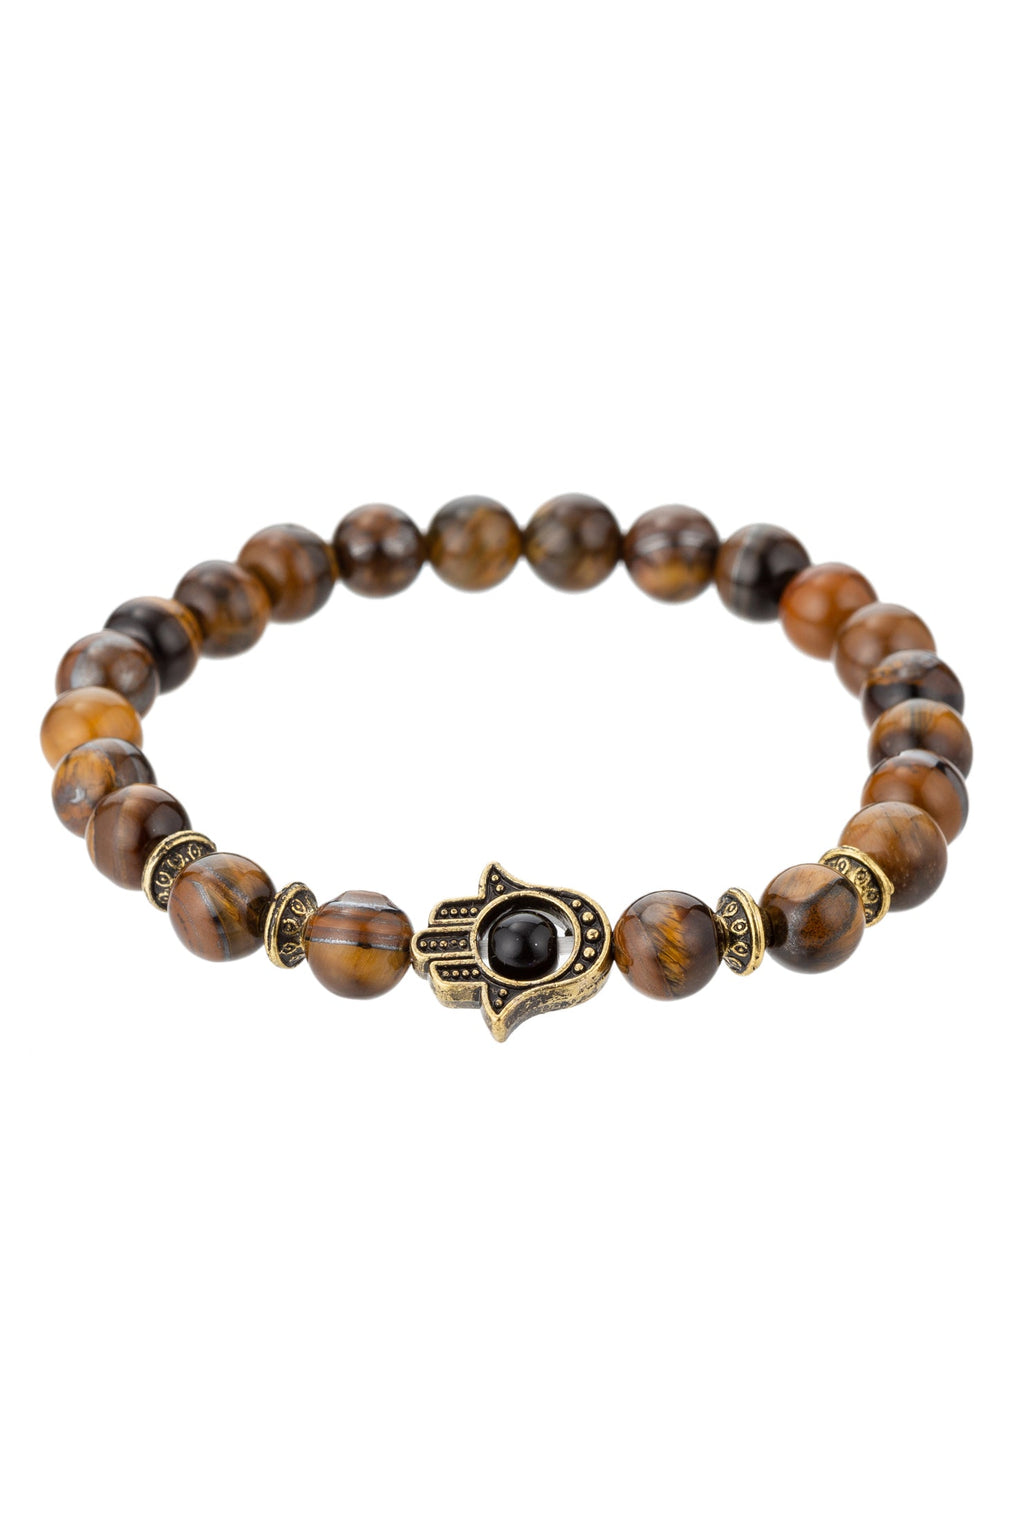 Hamsa Black Beaded Stretch Bracelet: Embrace Protection and Style with This Symbolic Accessory.